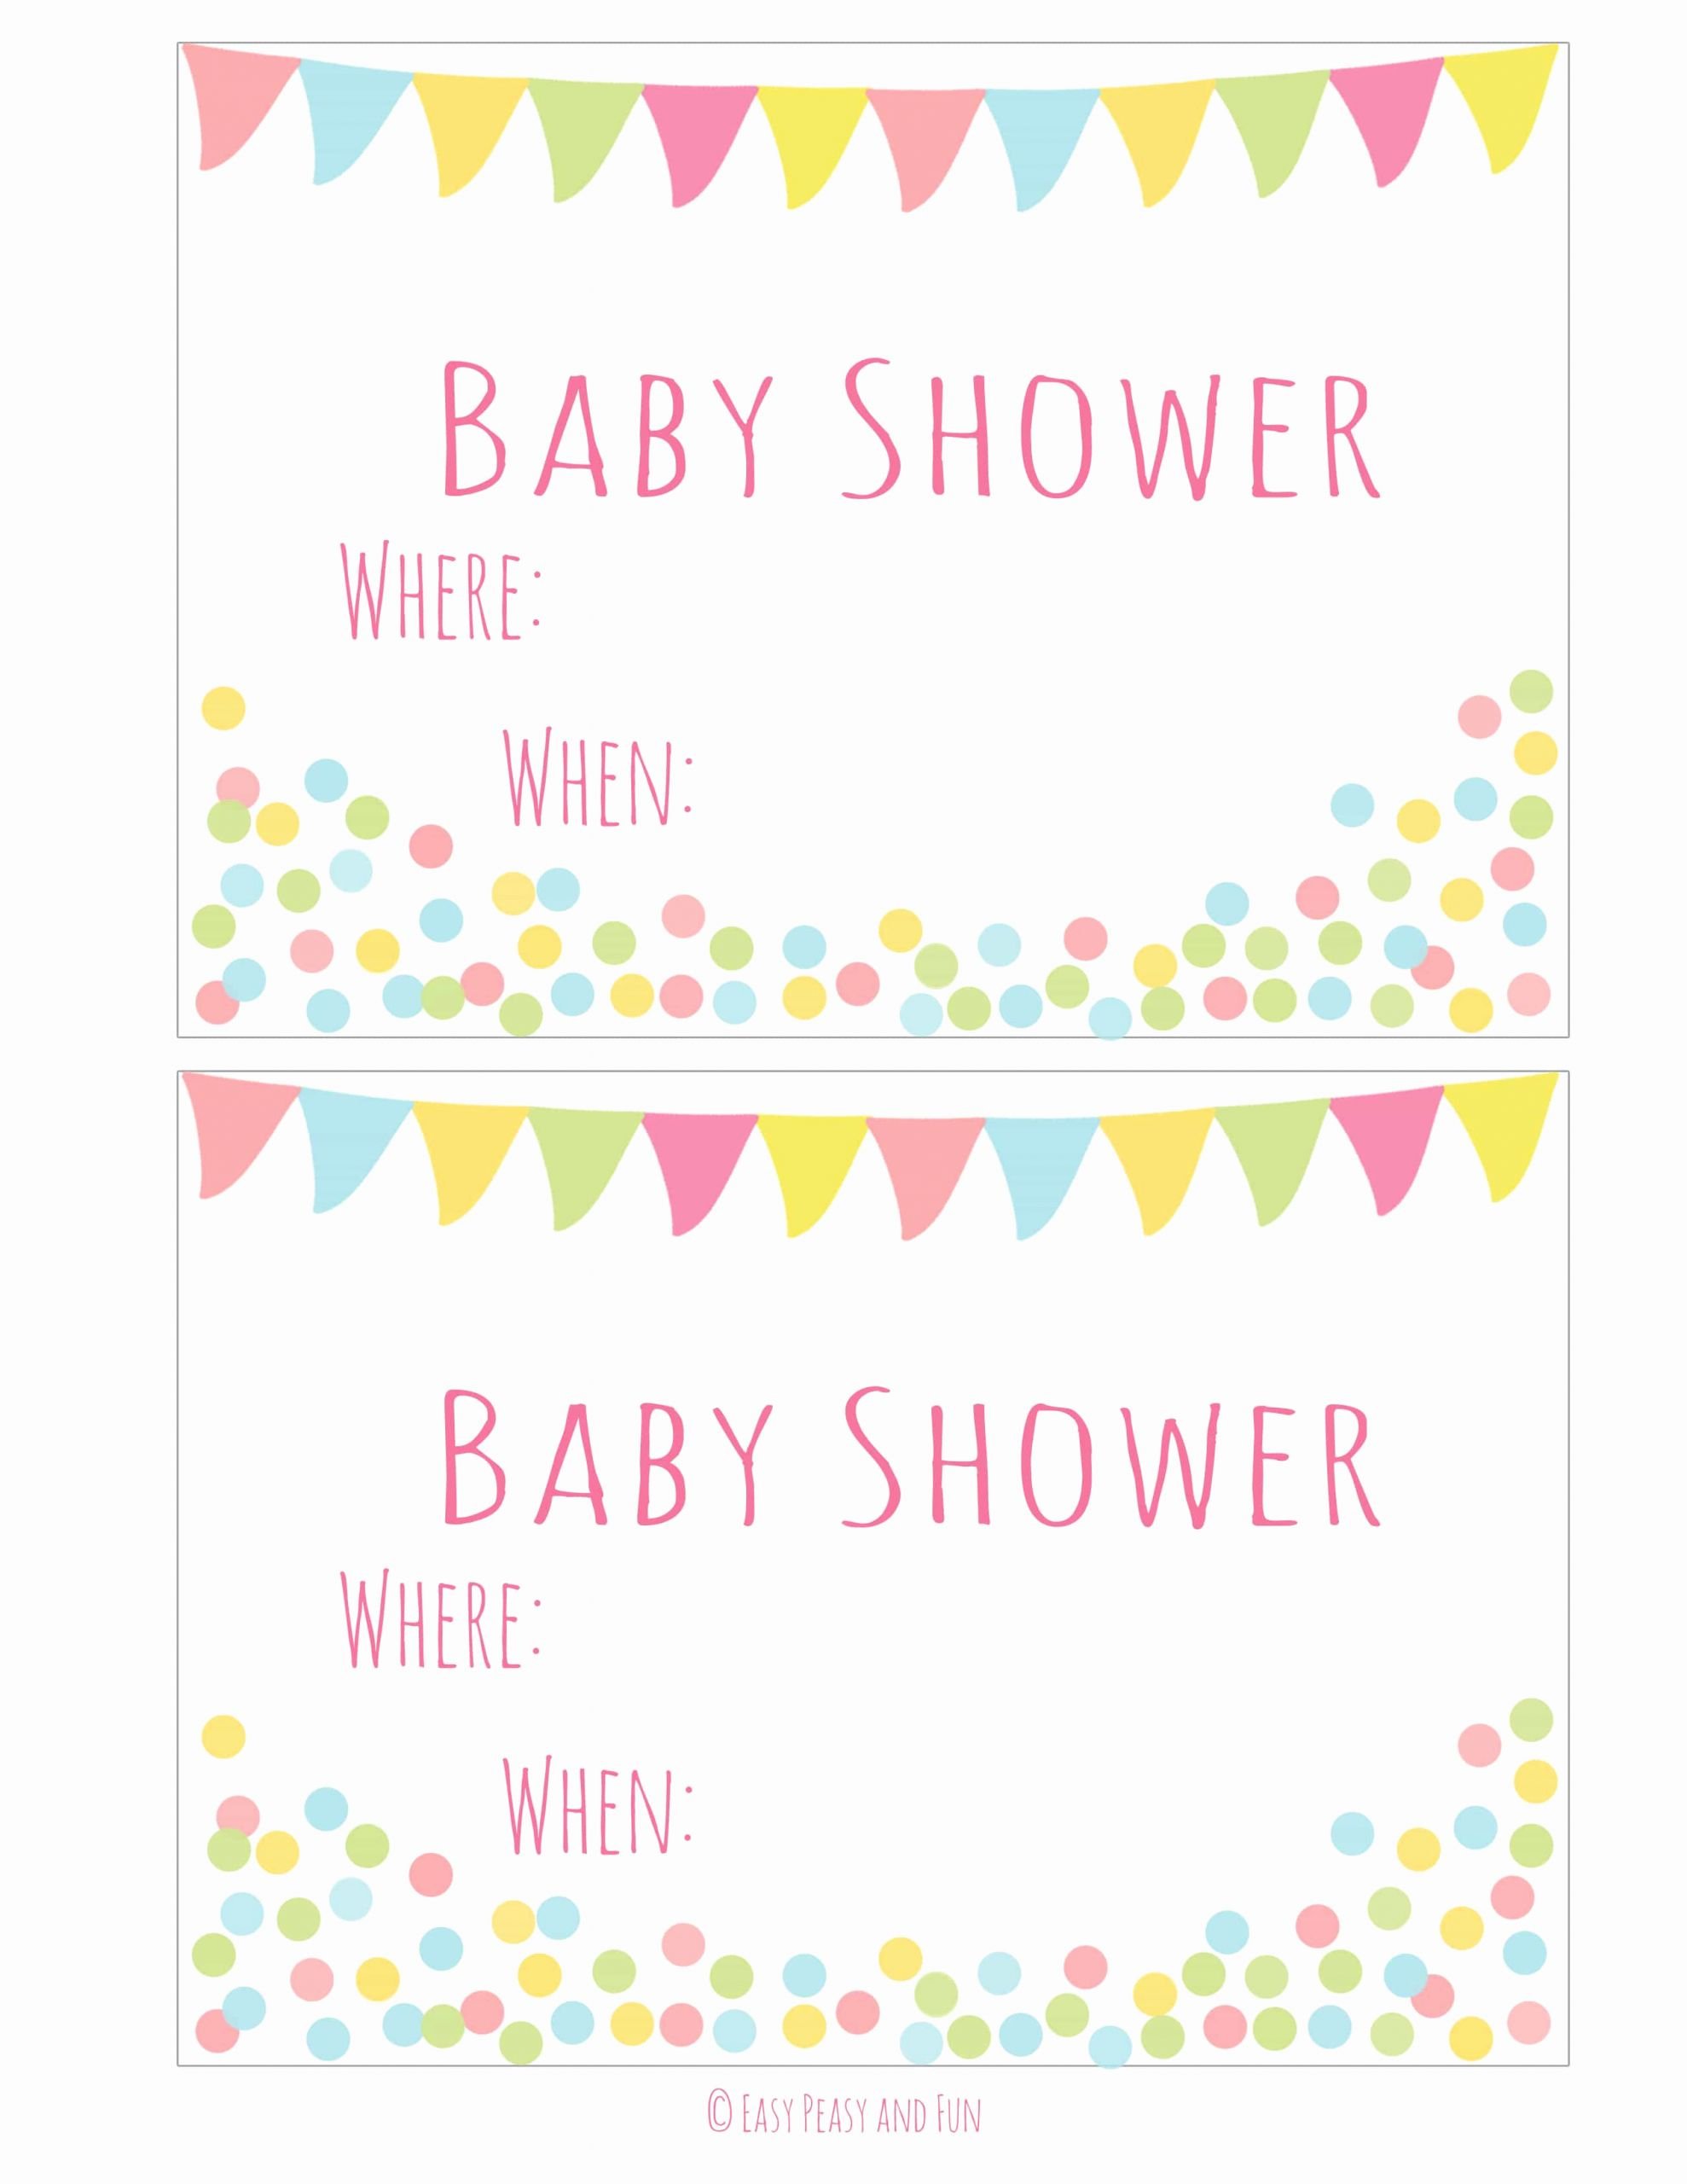 Baby Shower Invitation Template Free Beautiful Free Printable Baby Shower Invitation Easy Peasy and Fun